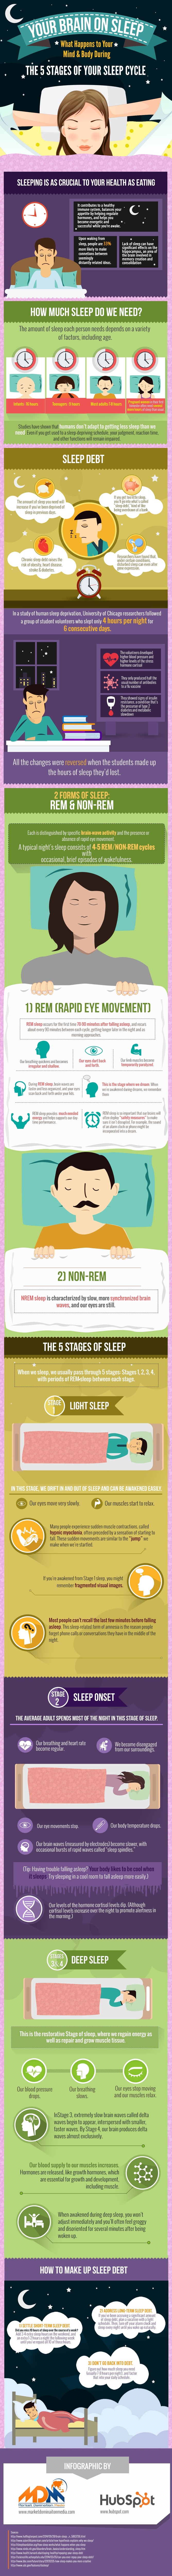 The science of sleep - Stages of Your Sleep Cycle 